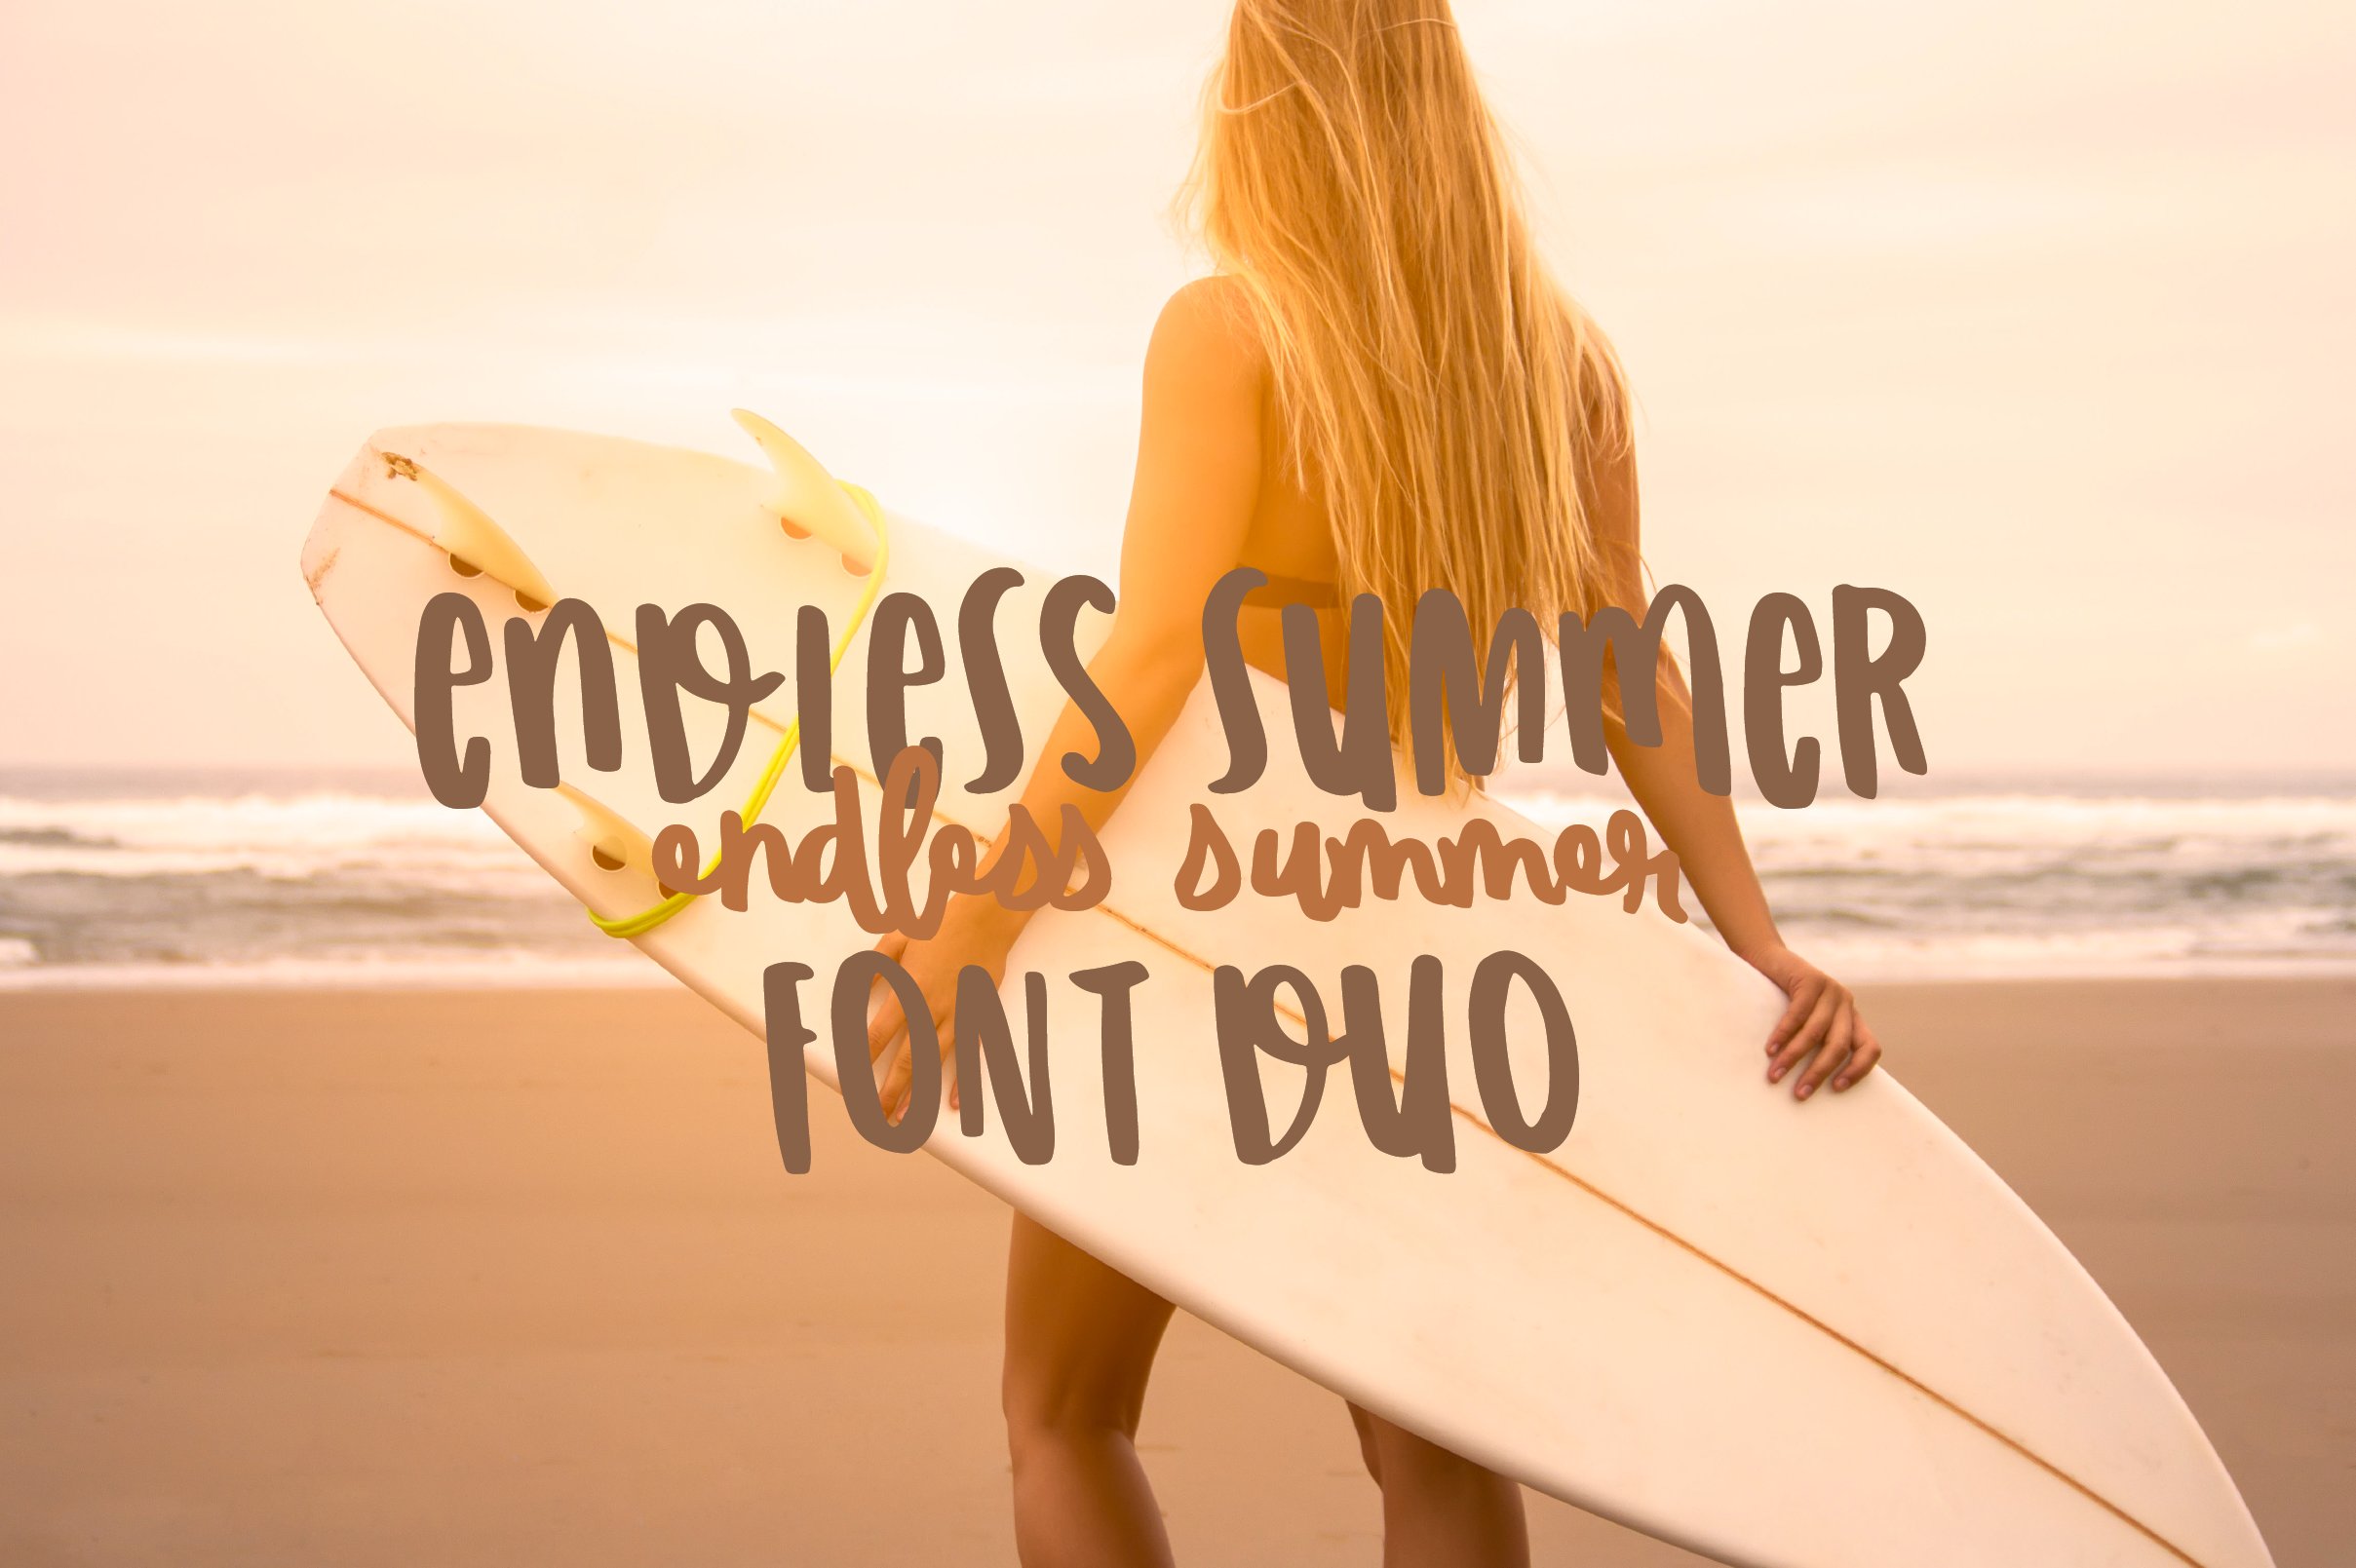 Endless Summer Font Duo cover image.